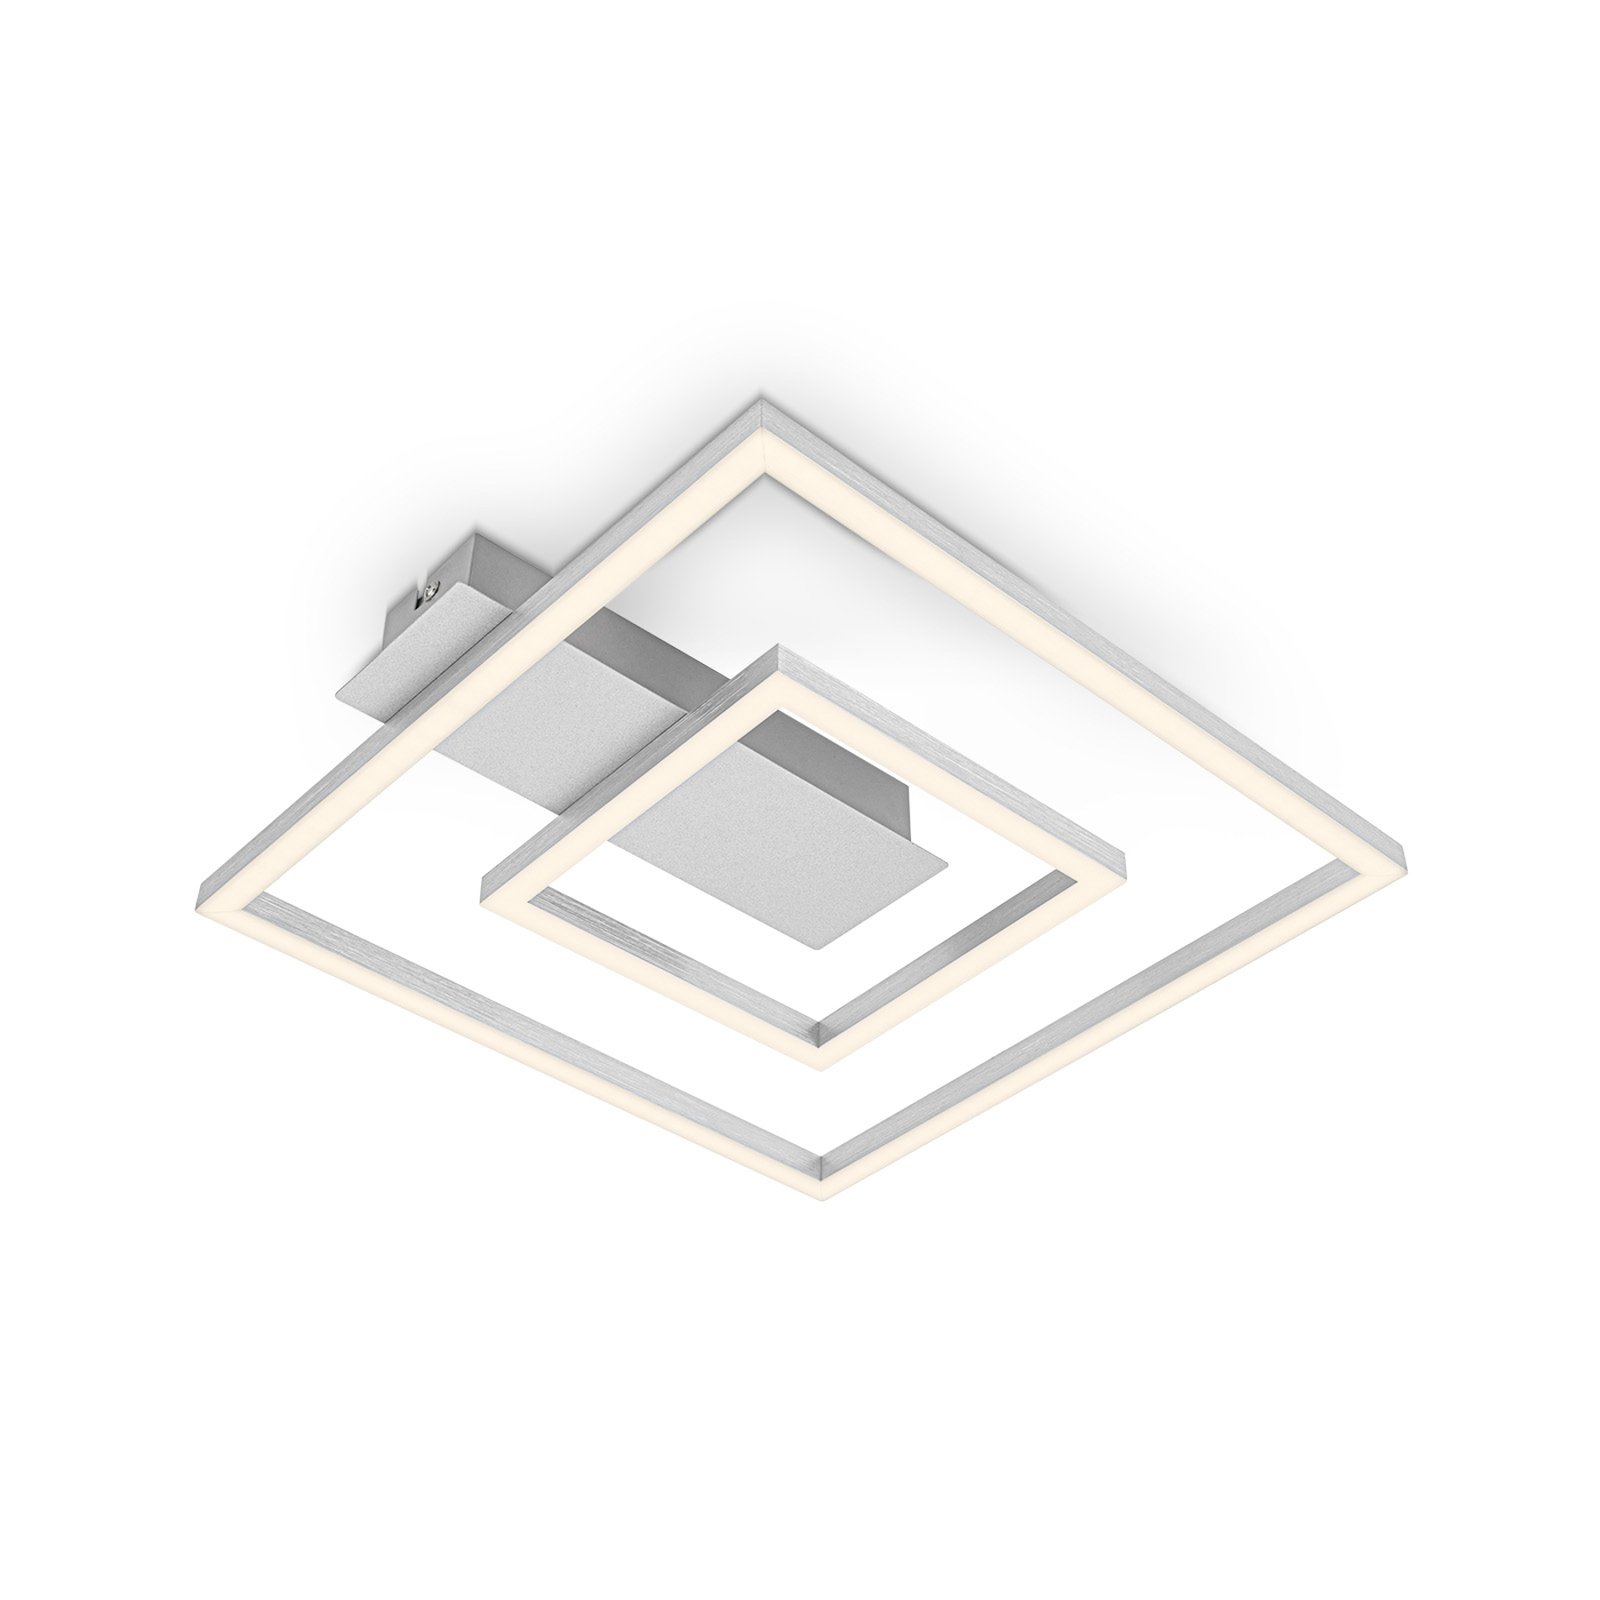 3772 LED ceiling light with two frames aluminium